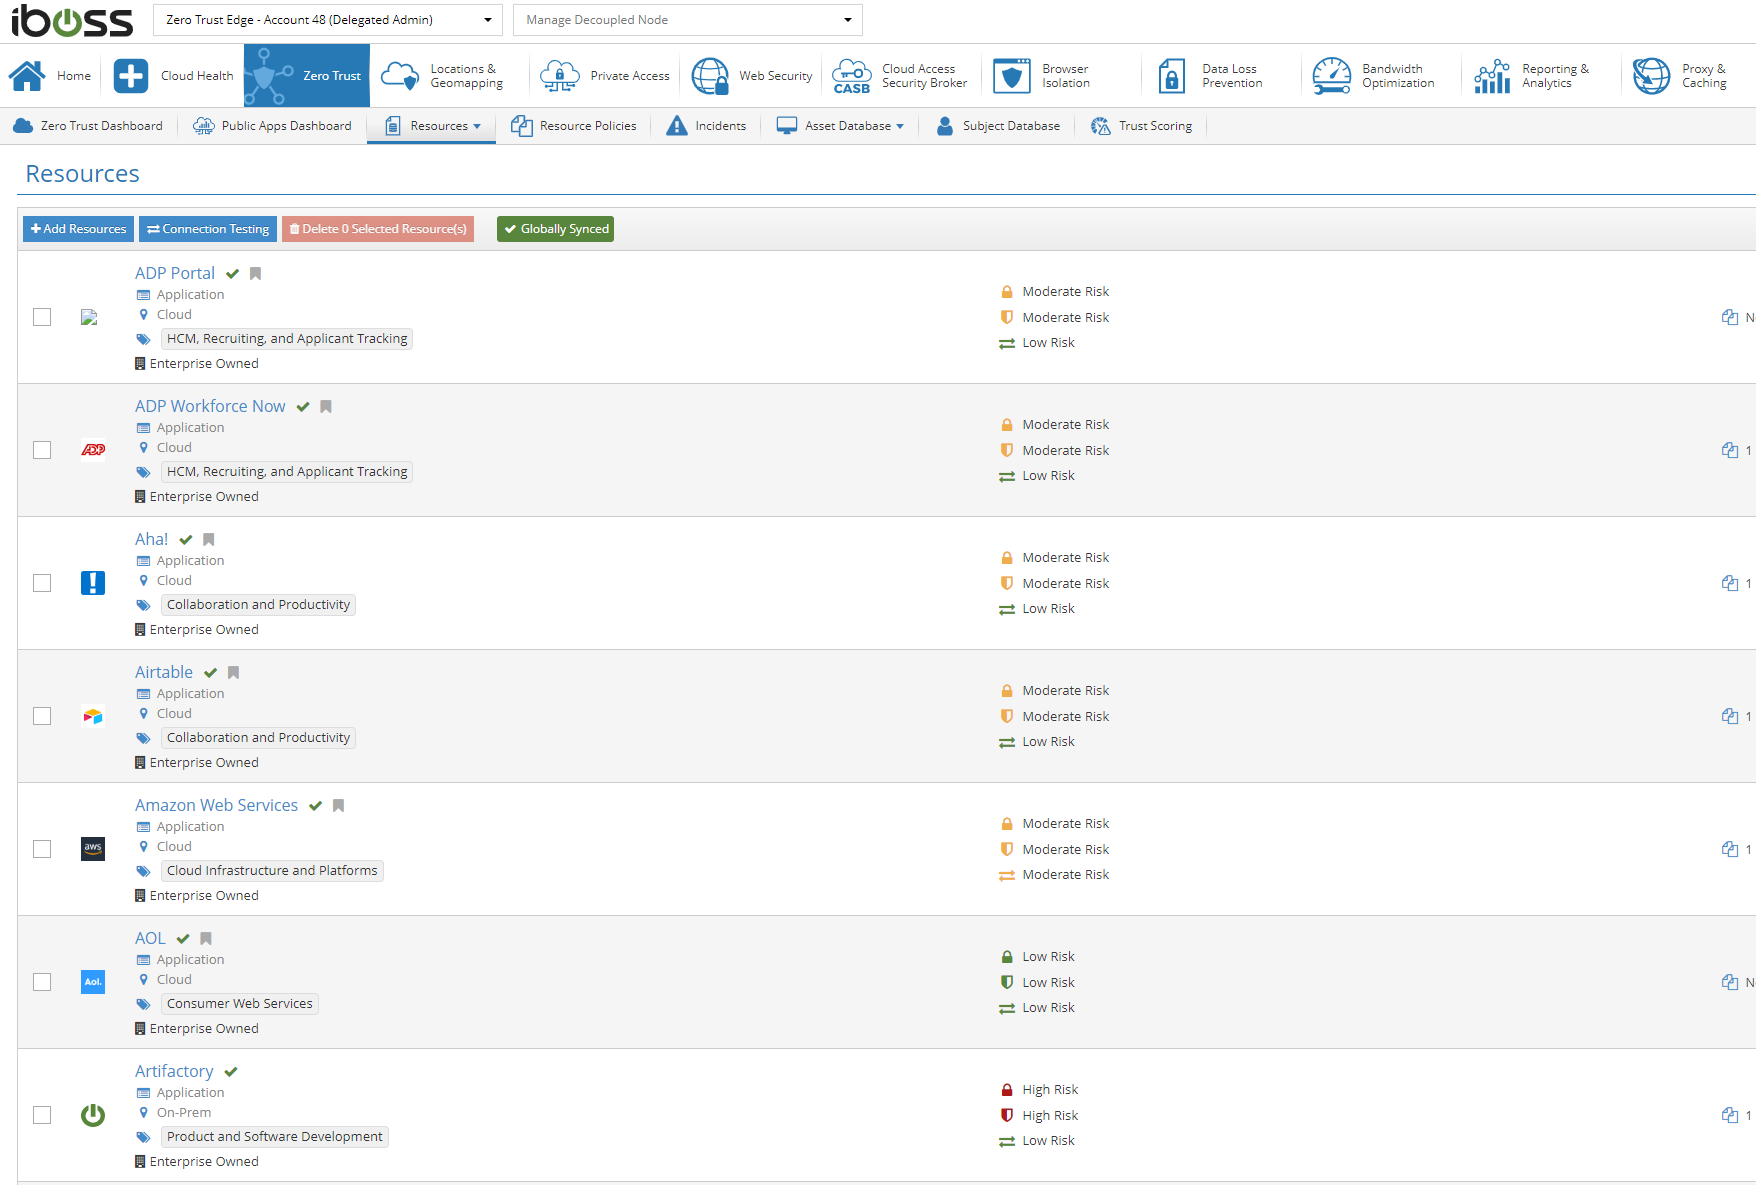 Employs Unified Resource Catalog for SaaS, cloud and on-prem resources